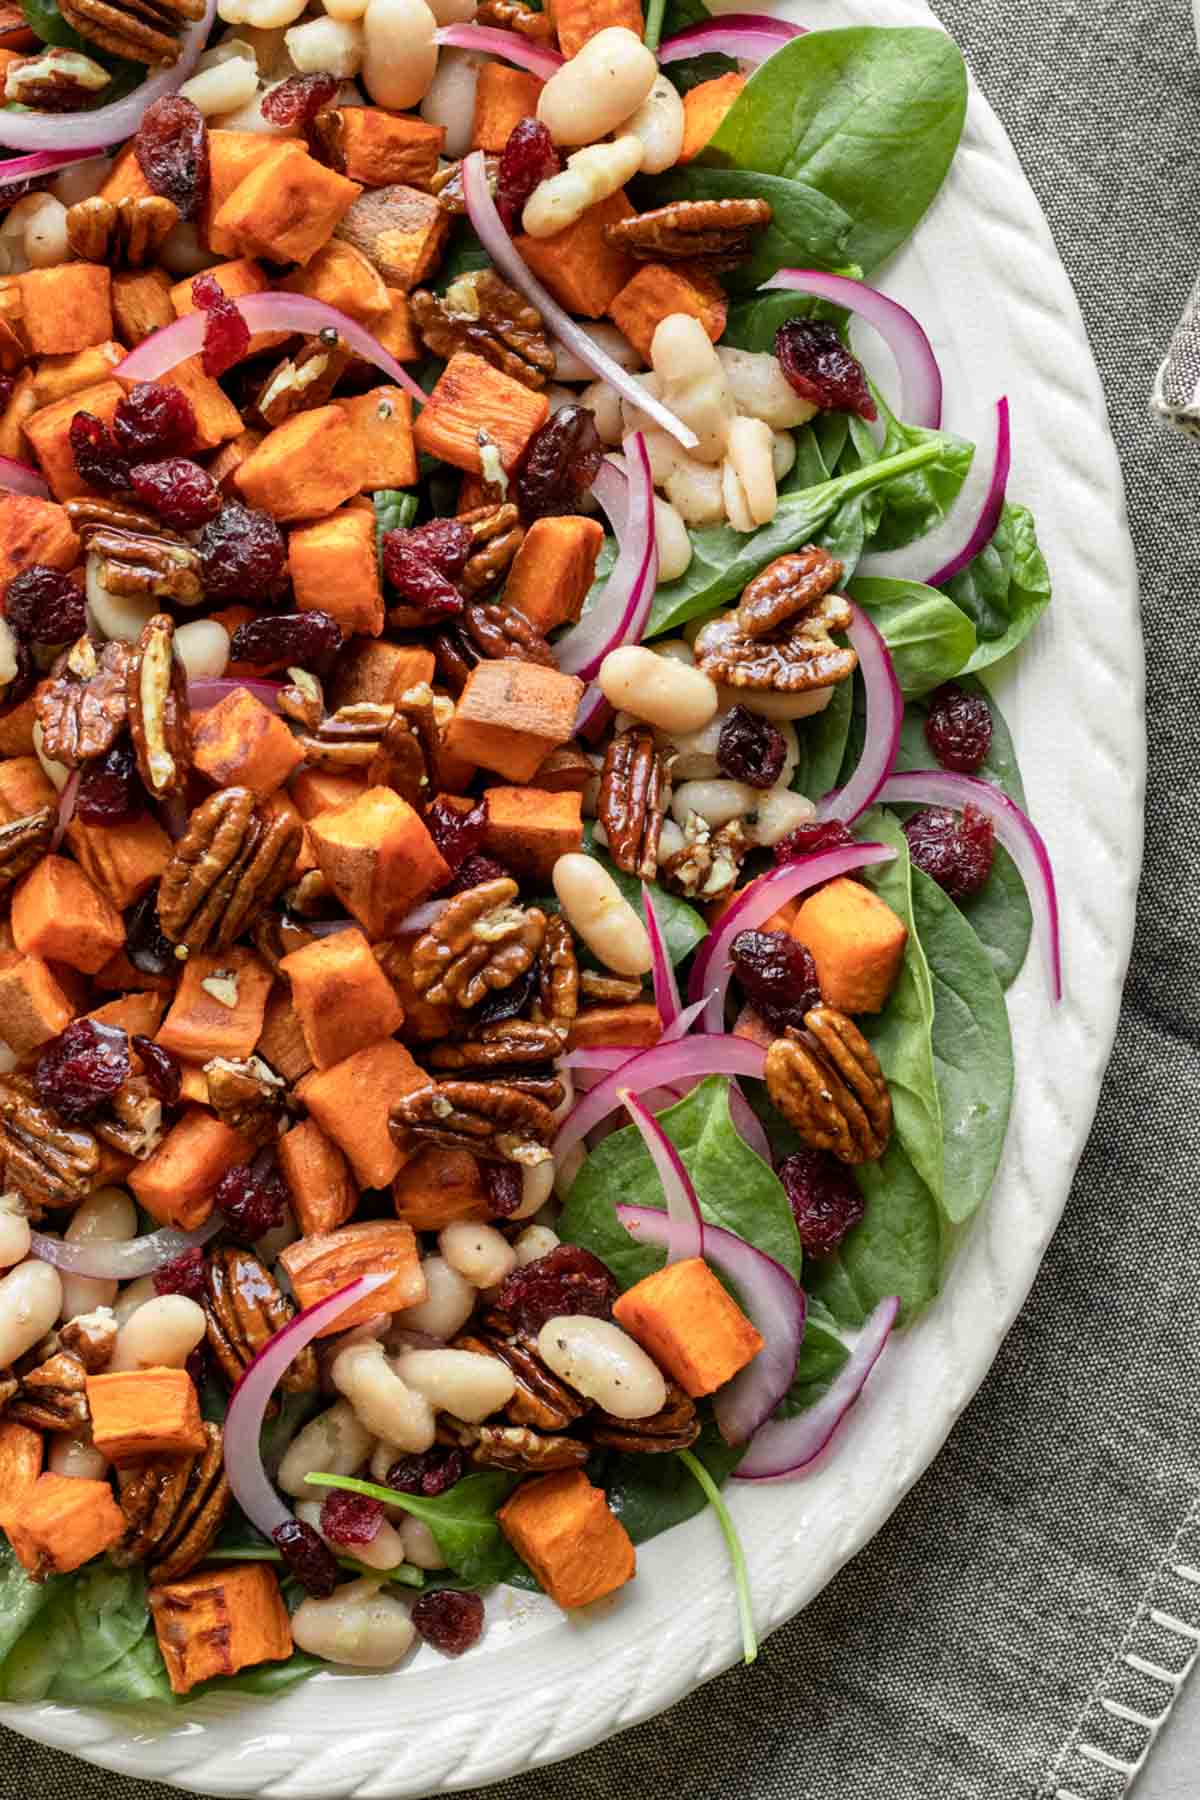 Spinach salad featuring dried cranberries and roasted sweet potato.